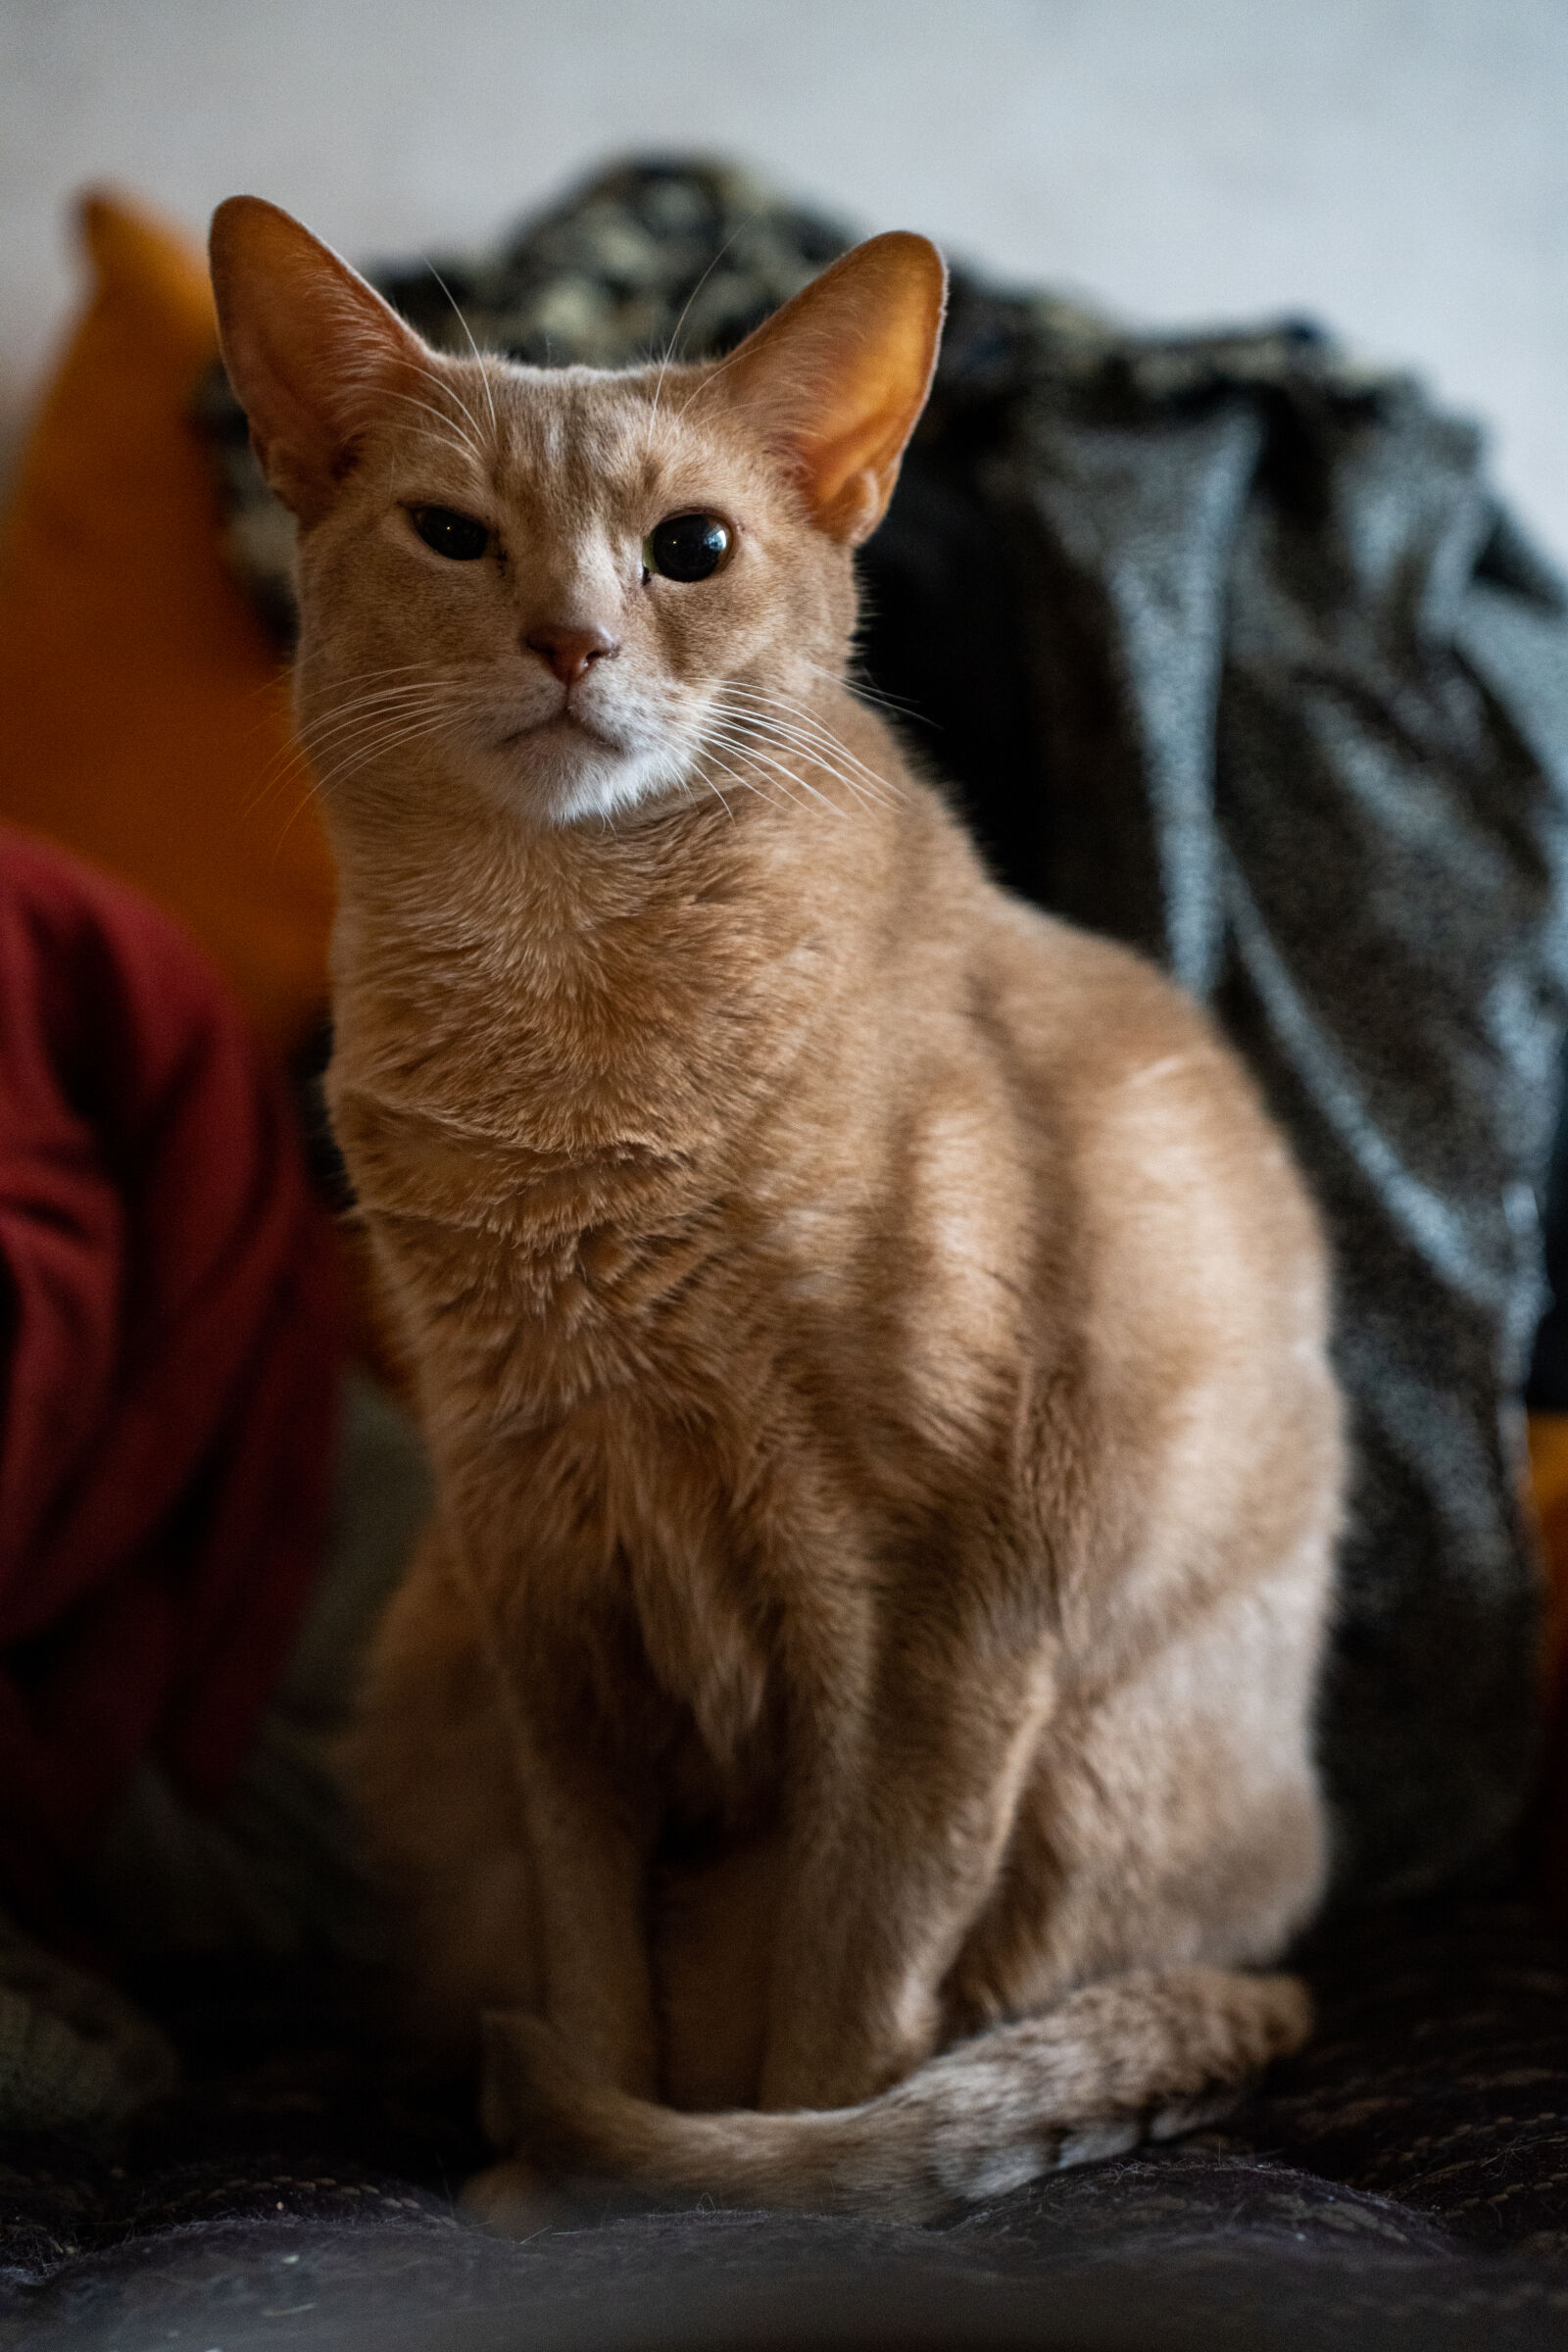 Sony a7R IV + Tamron 28-75mm F2.8 Di III VXD G2 sample photo. The cat analog photography